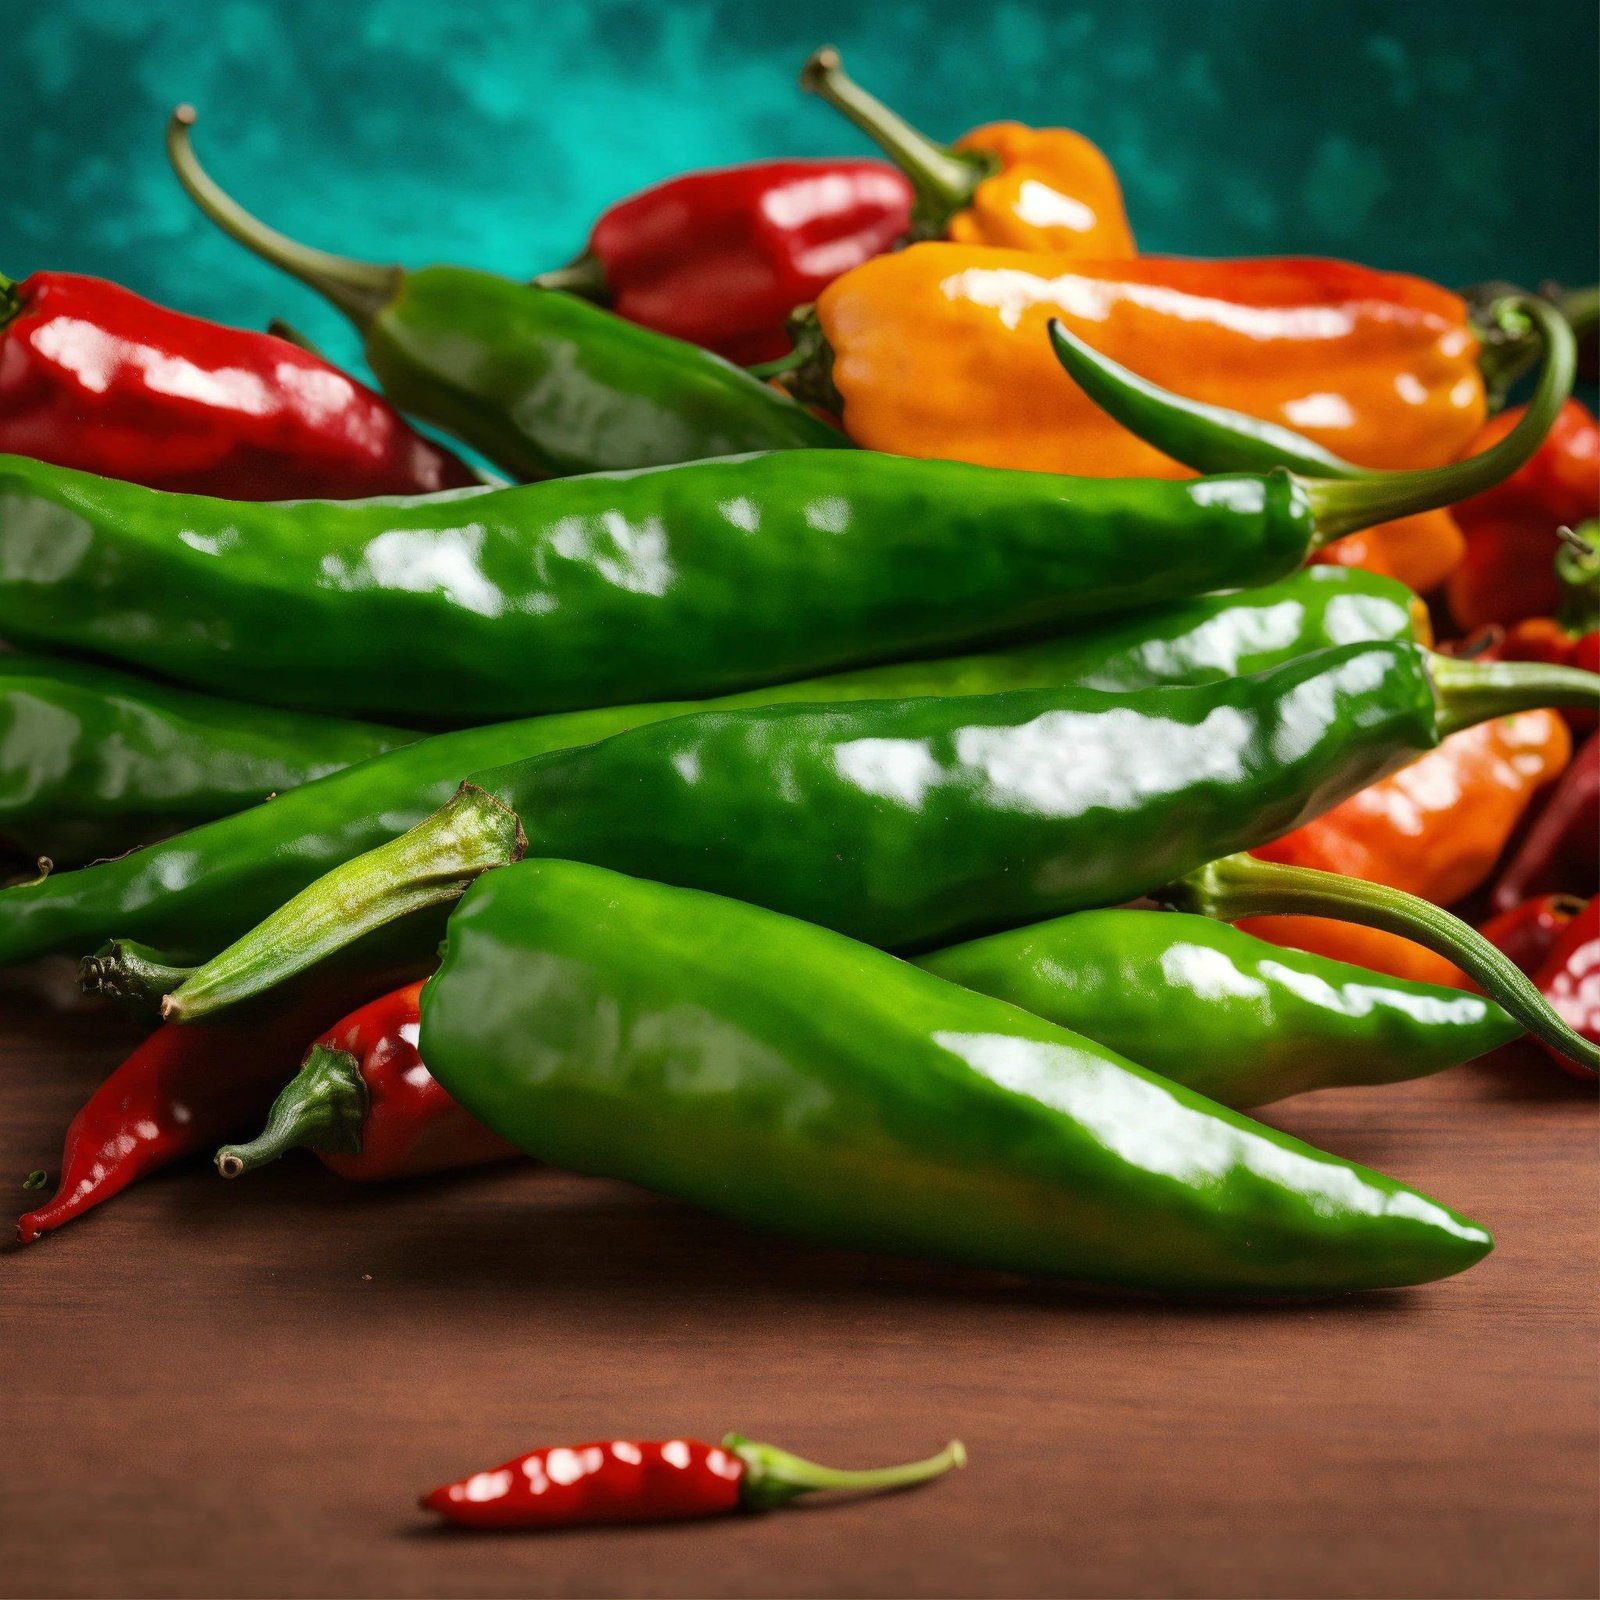 are ornamental peppers edible?